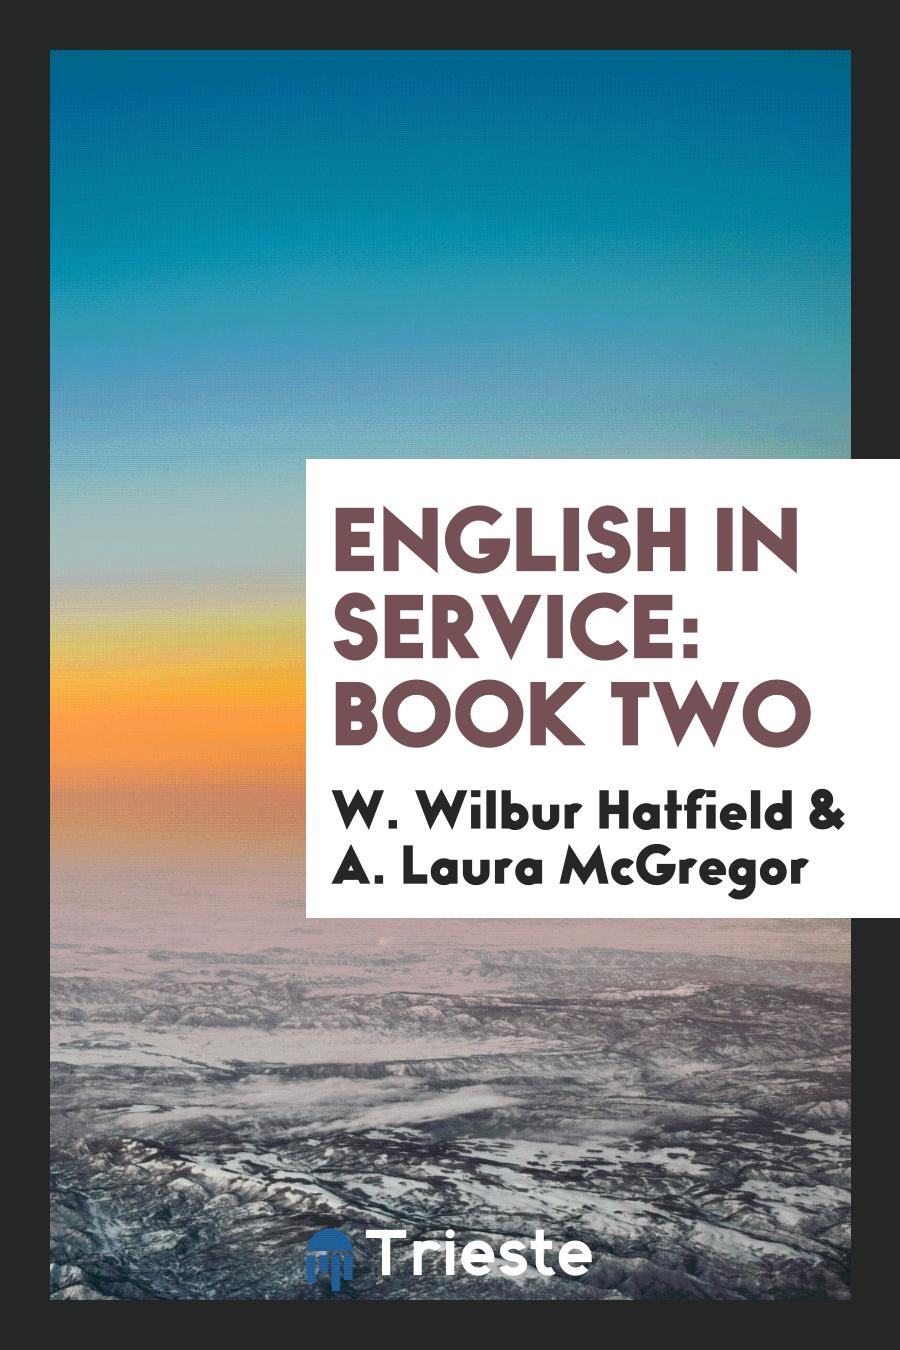 English in Service: Book Two